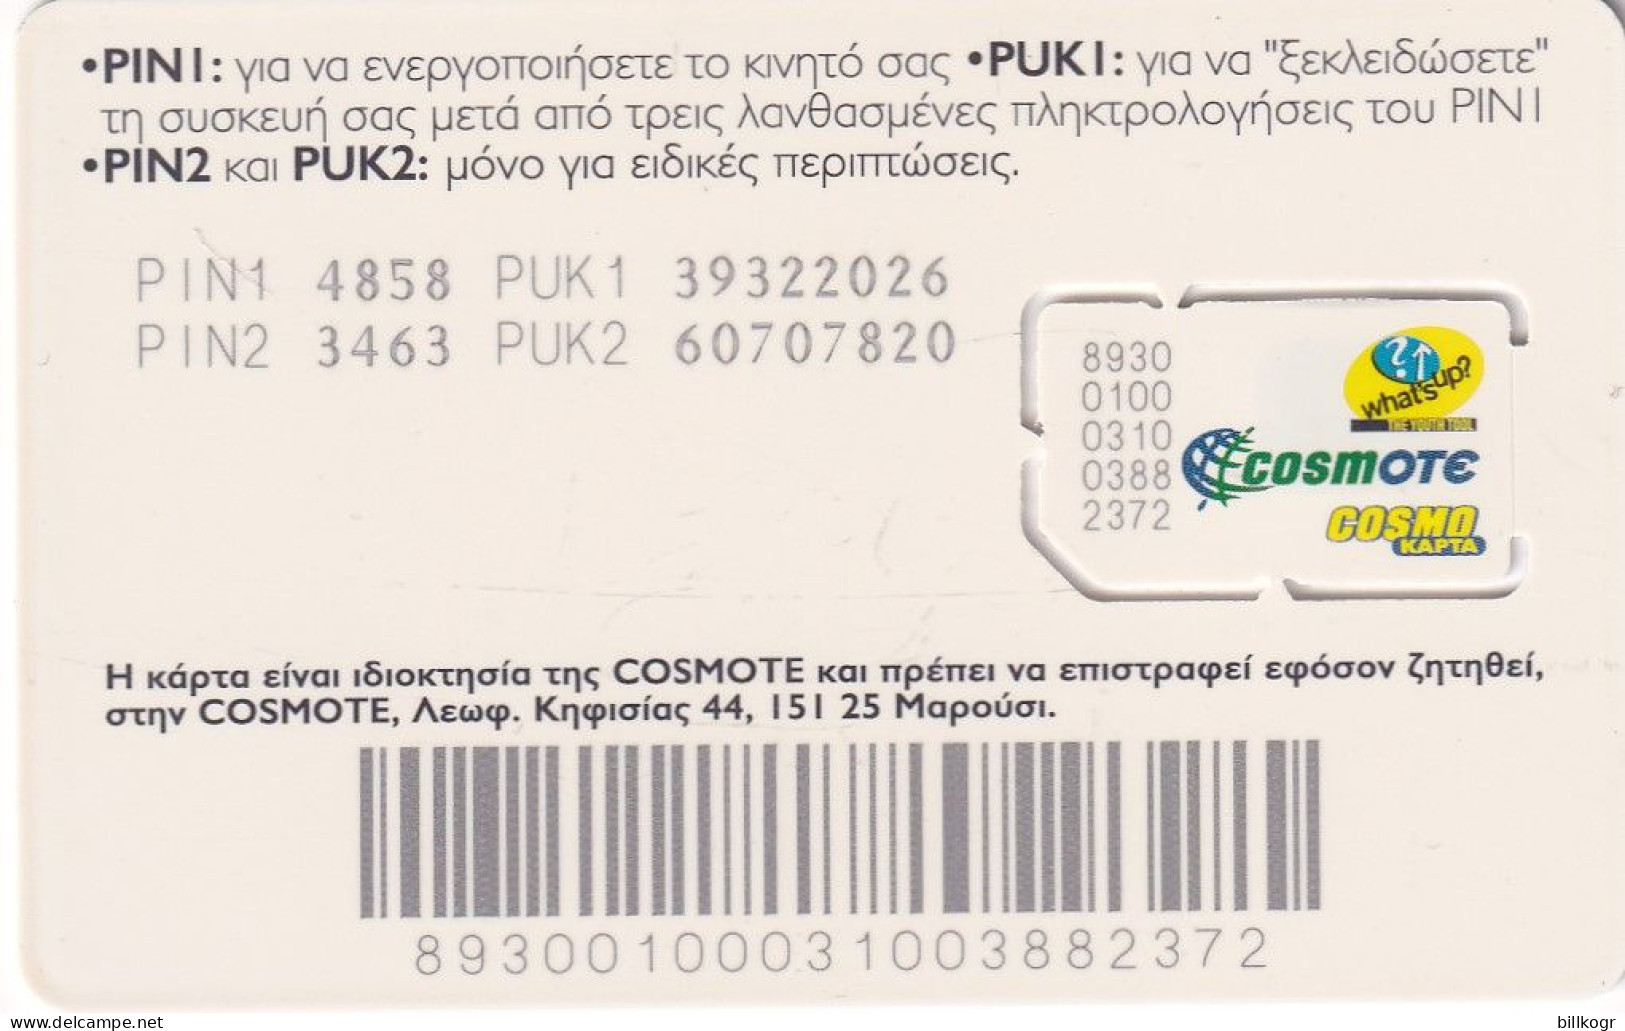 GREECE - Athens 2004 Olympics, Cosmote GSM, Mint - Grecia